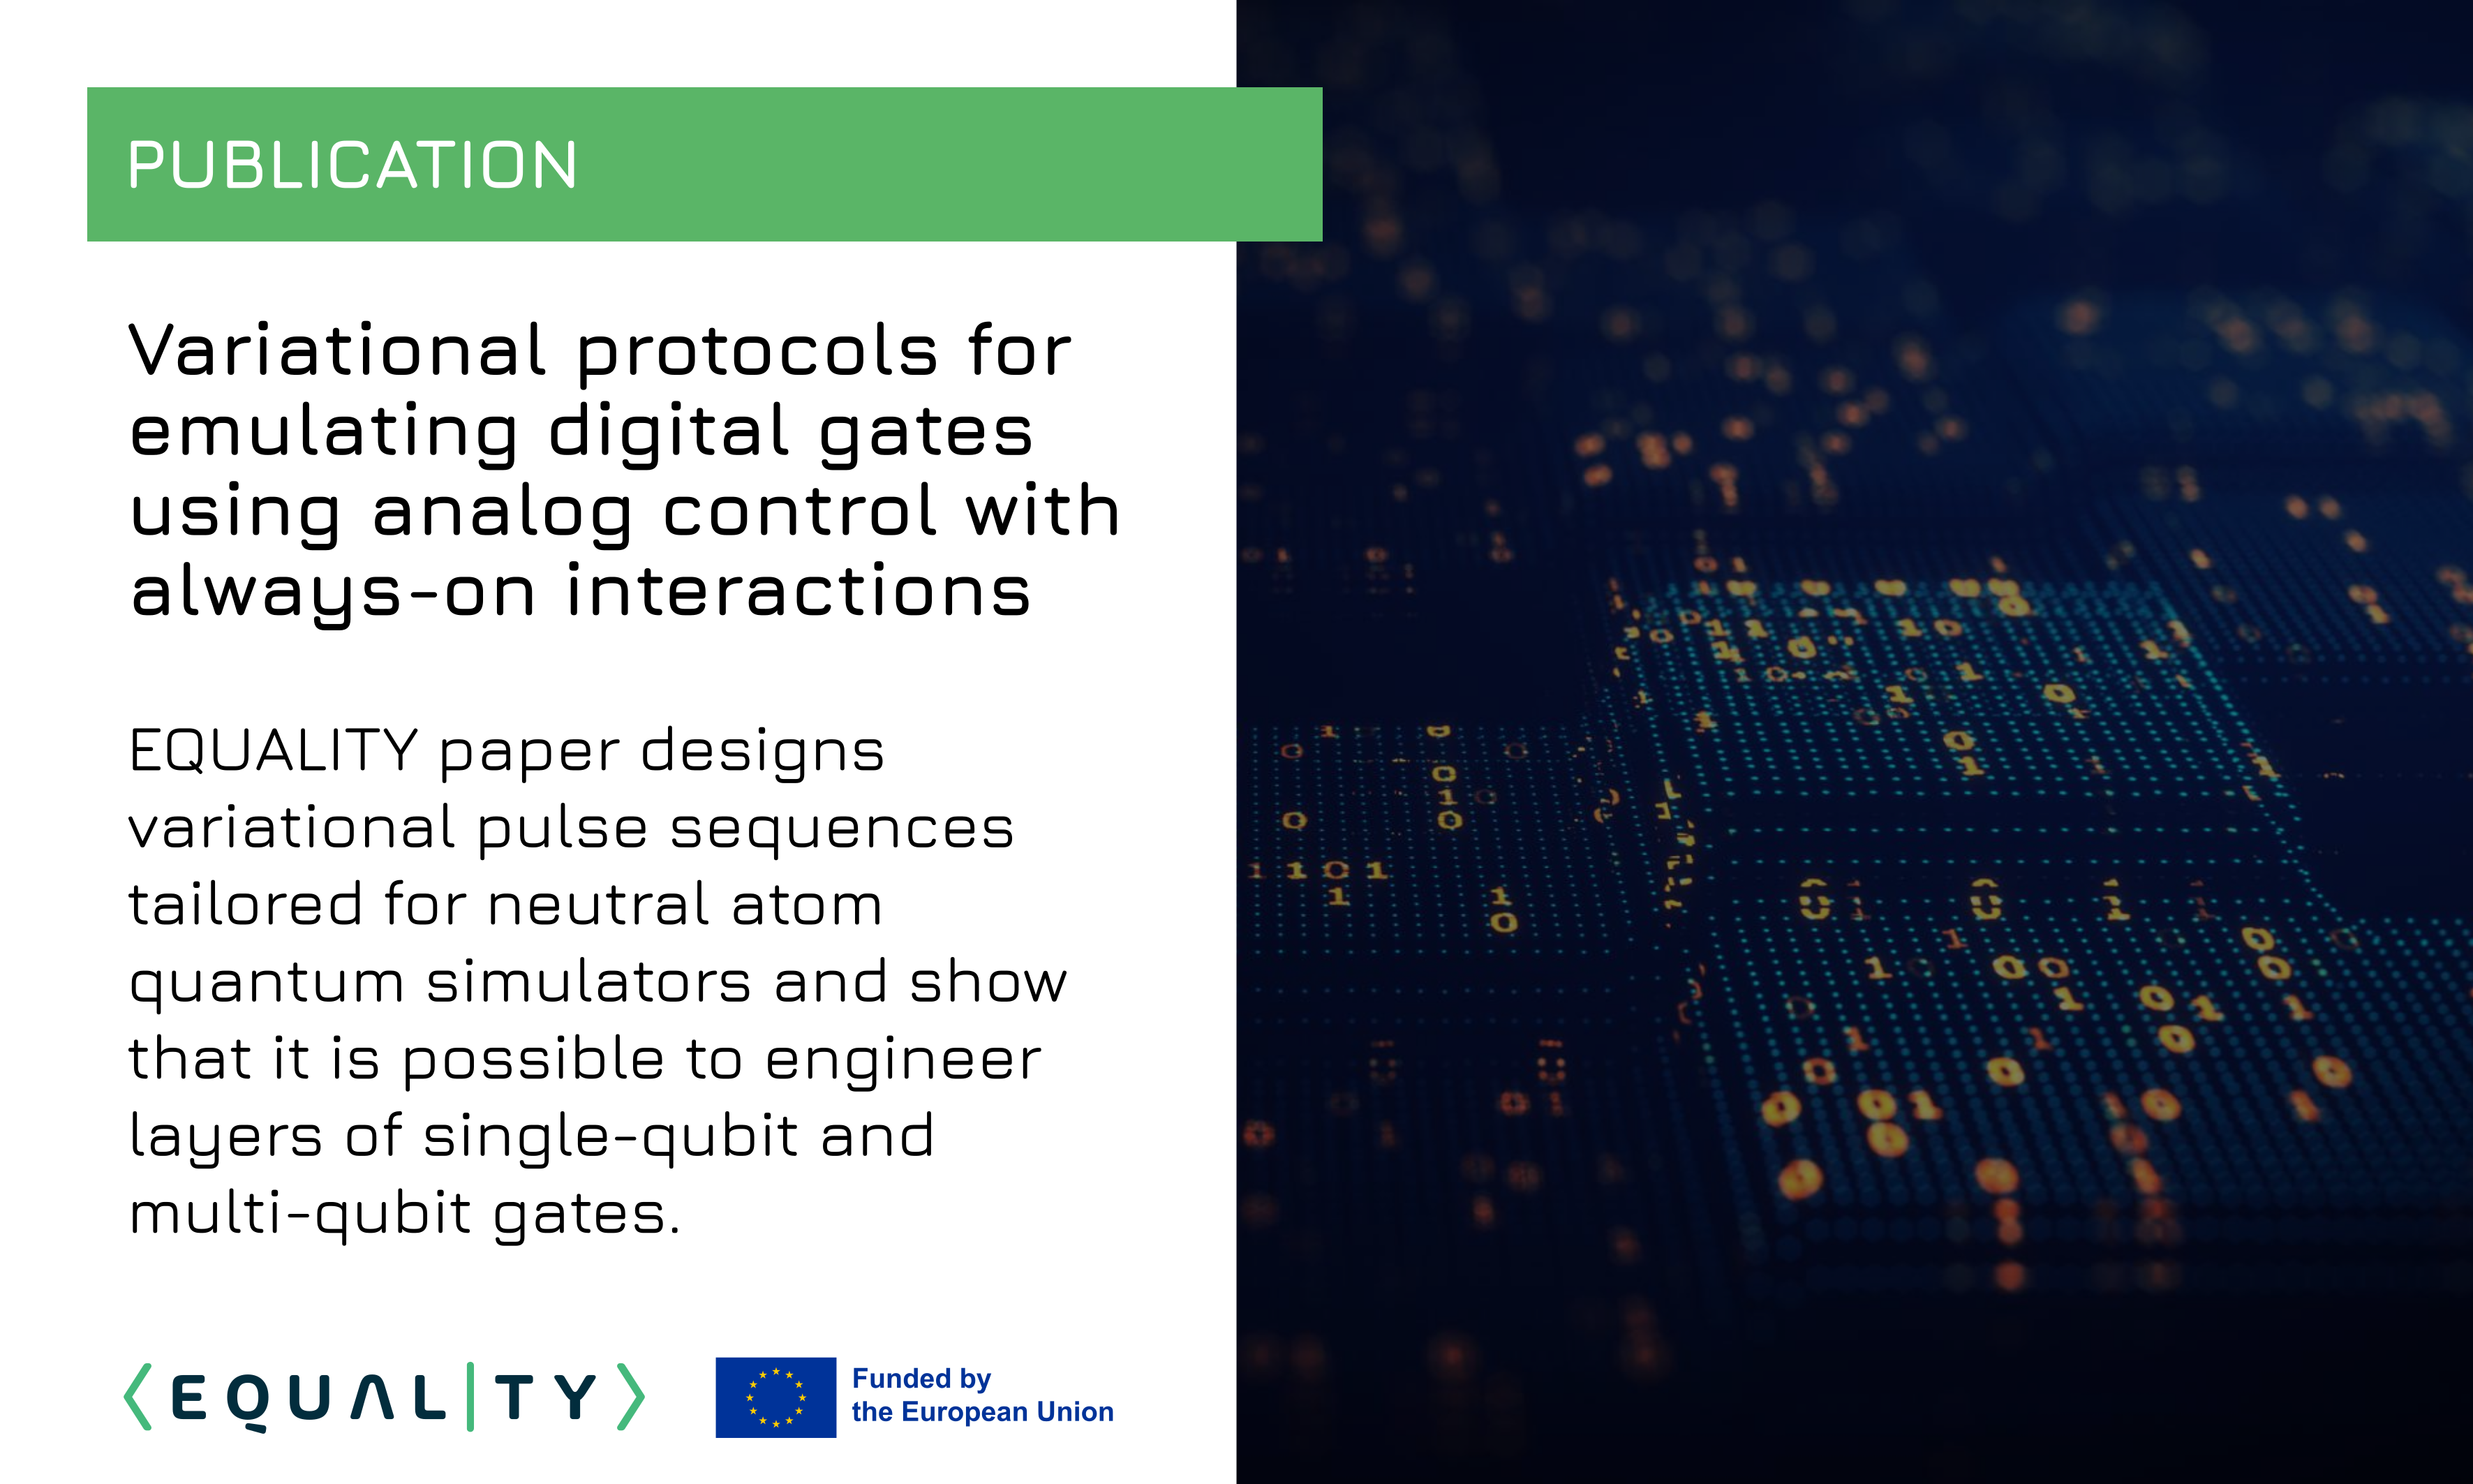 Publication: Variational protocols for emulating digital gates using analog control with always-on interactions 